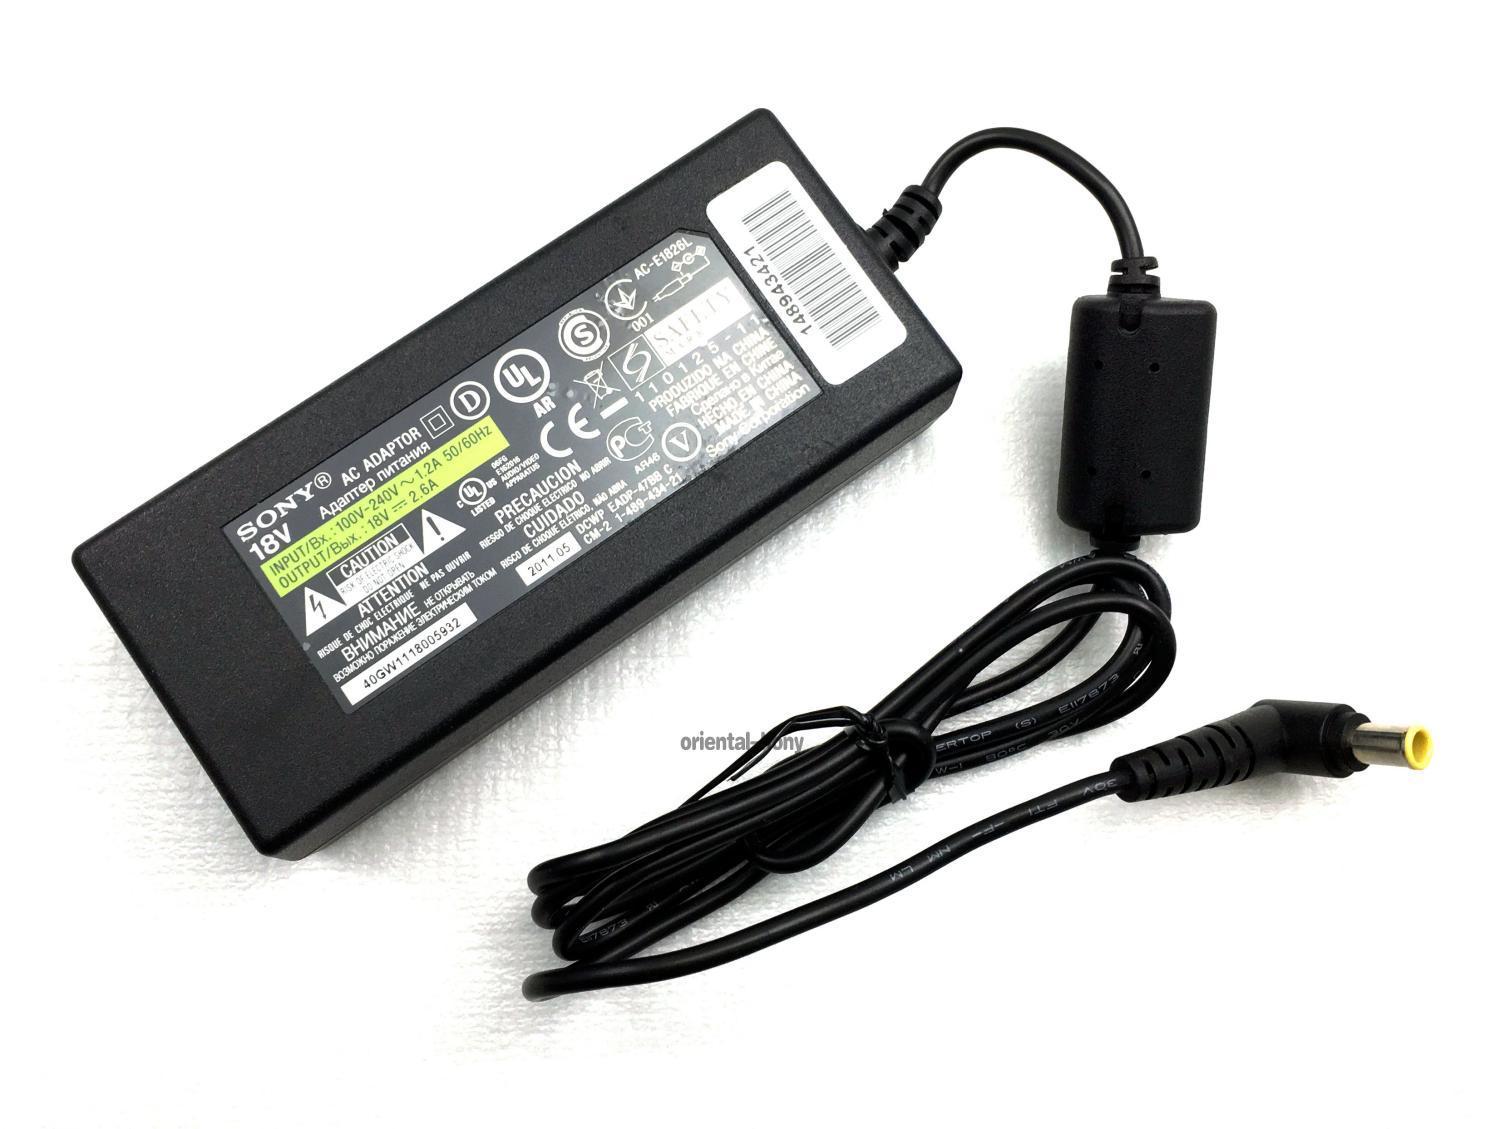 New Sony AC-E1826L 18v 2.6a AC Adapter Power Supply for Sony SRS-X7 SRS-X77 Bluetooth Portable Audio